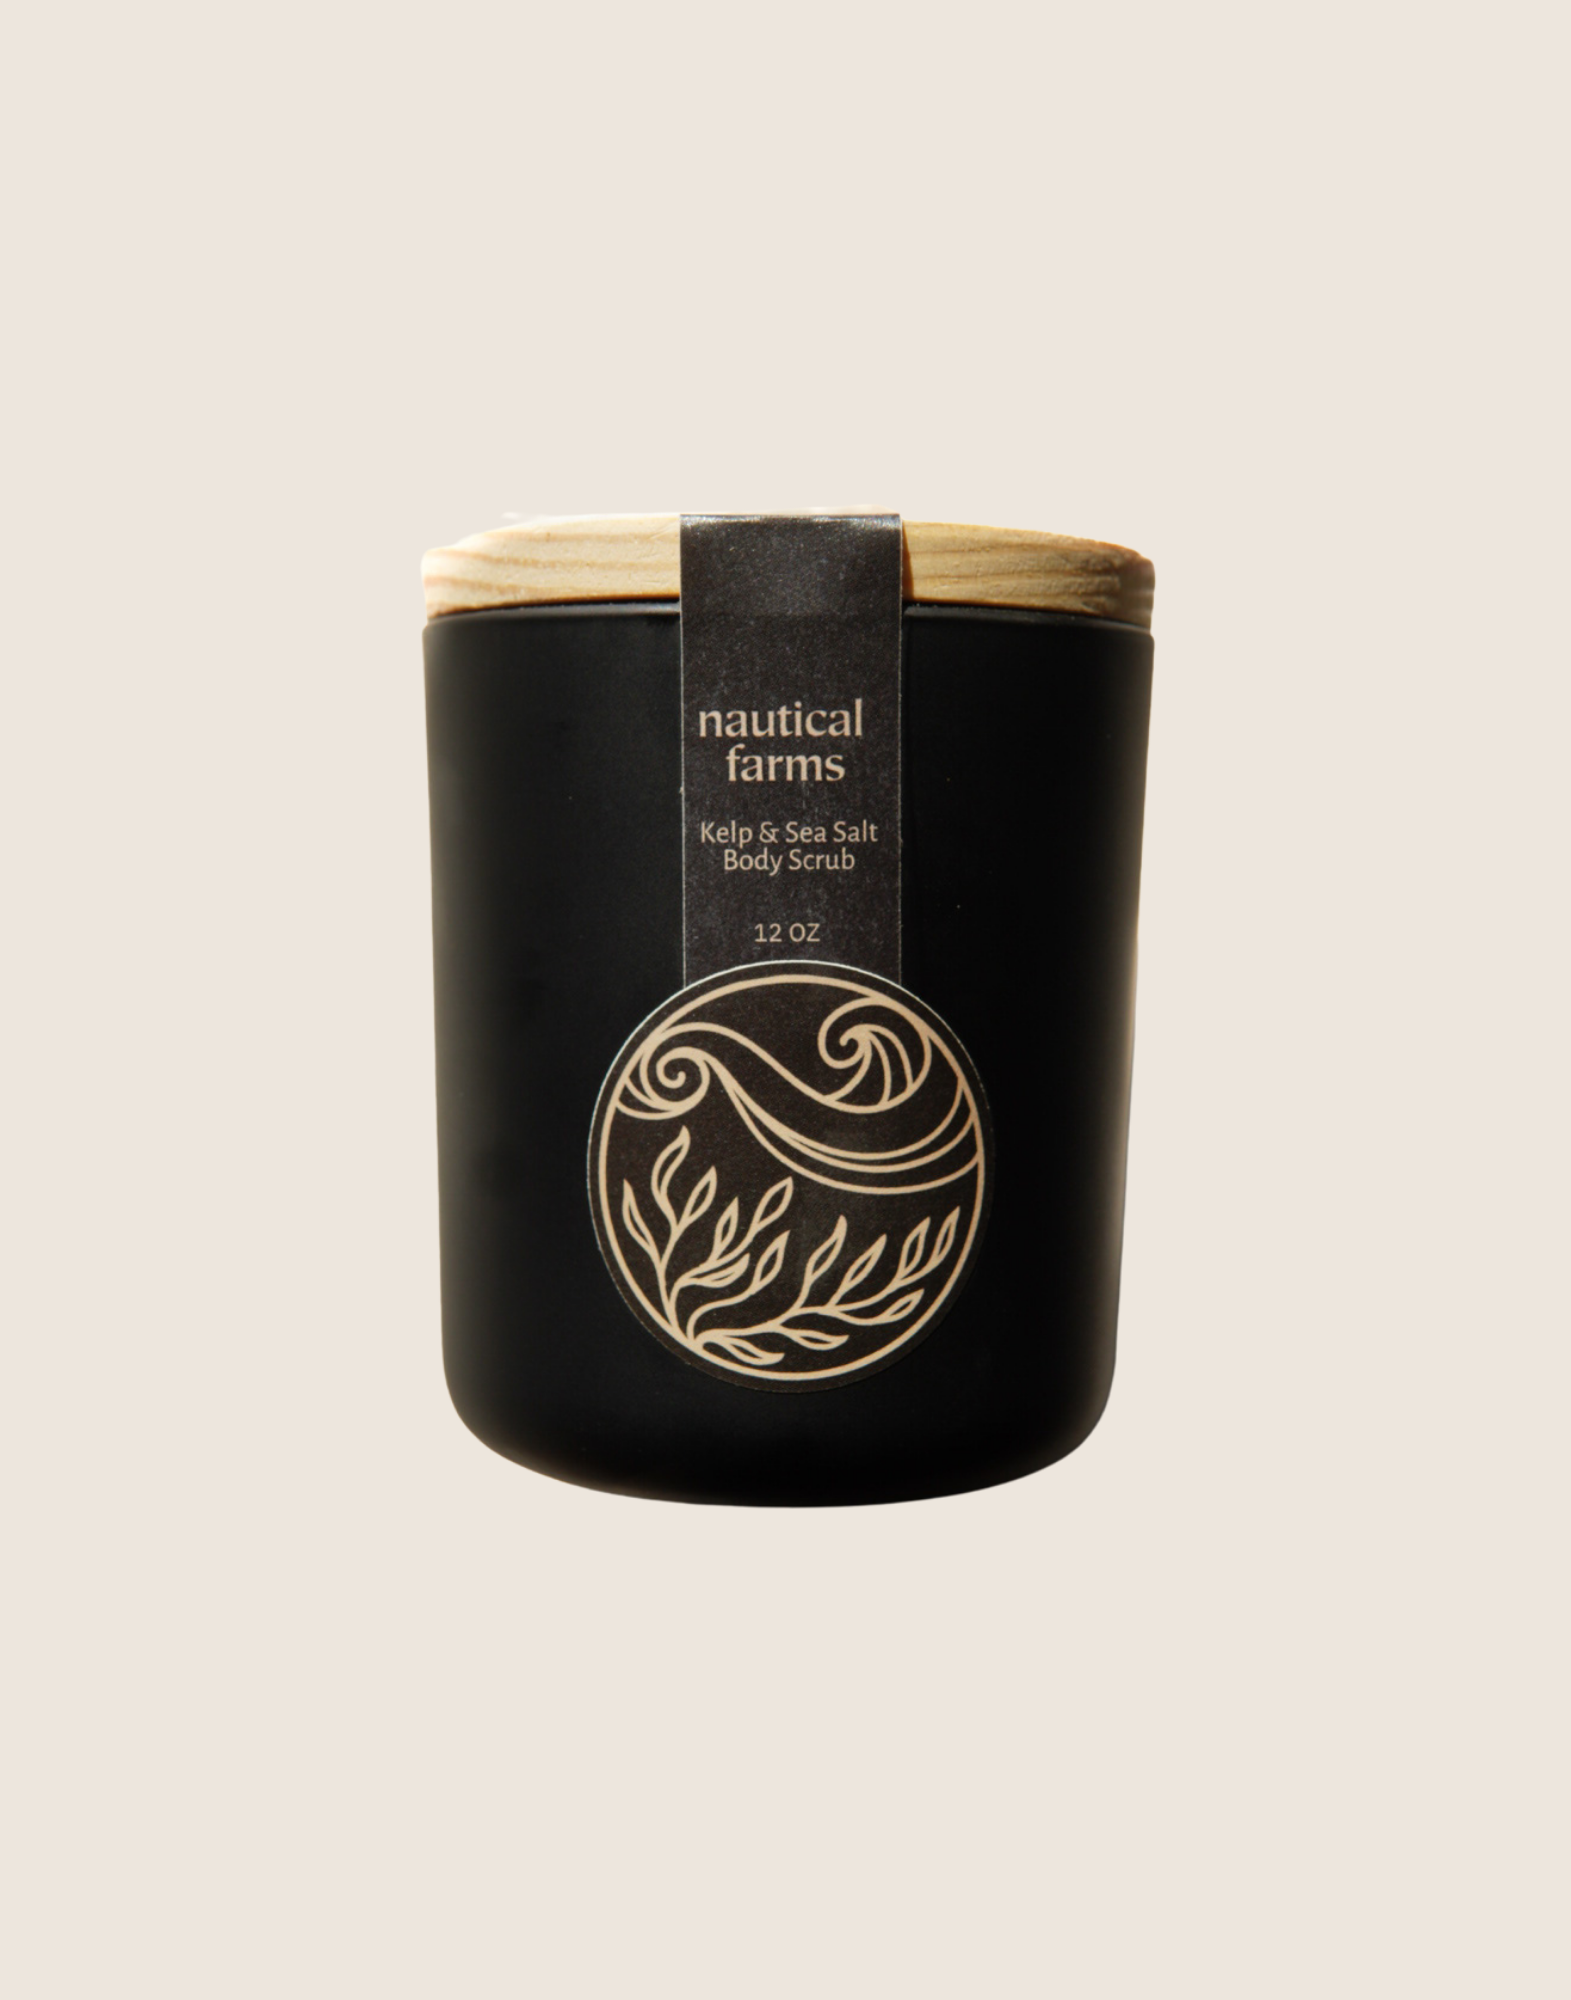 Kelp-infused sea salt body scrub with lemongrass scent. Natural exfoliant and moisturizer from Maine Seaweed Company Nautical Farms. 12 oz comes in reusable black matte jar with raw wood lid.